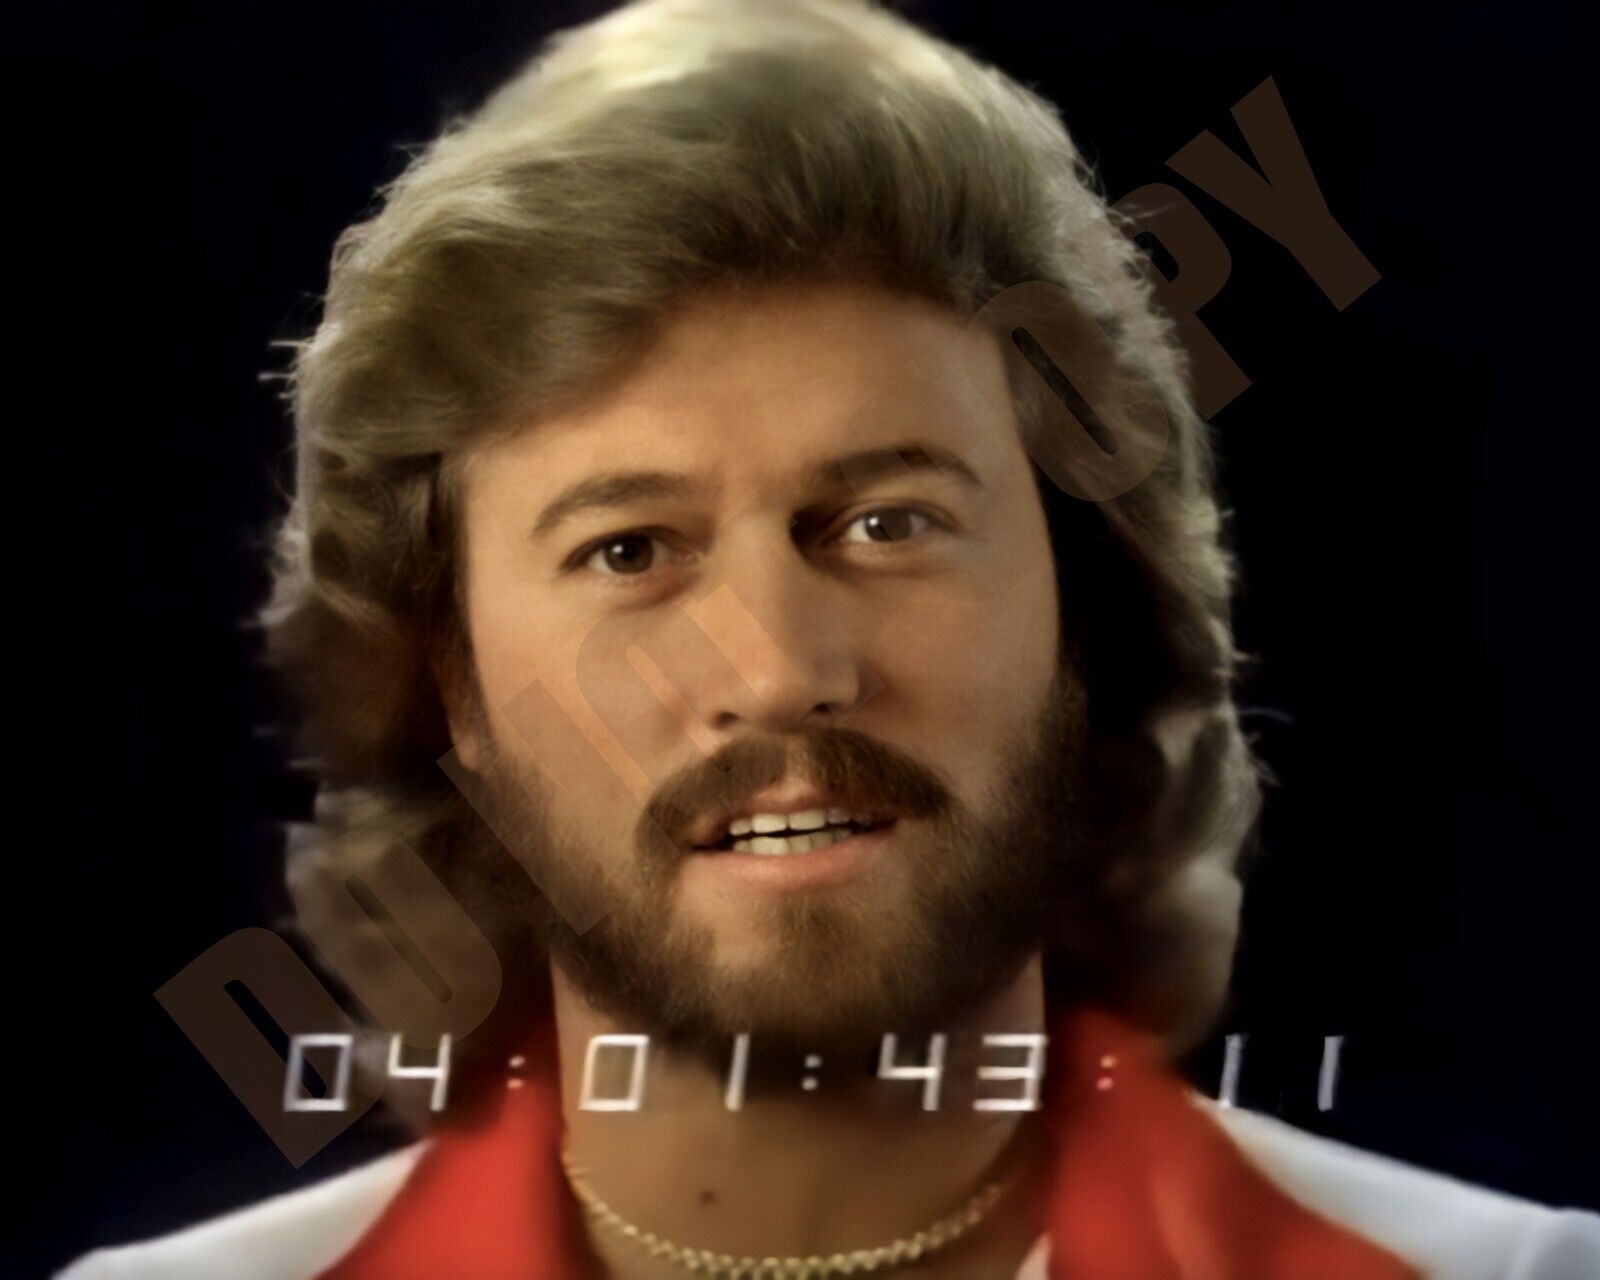 Barry Gibb of Bee Gees In Studio For Promo Video 8x10 Photo